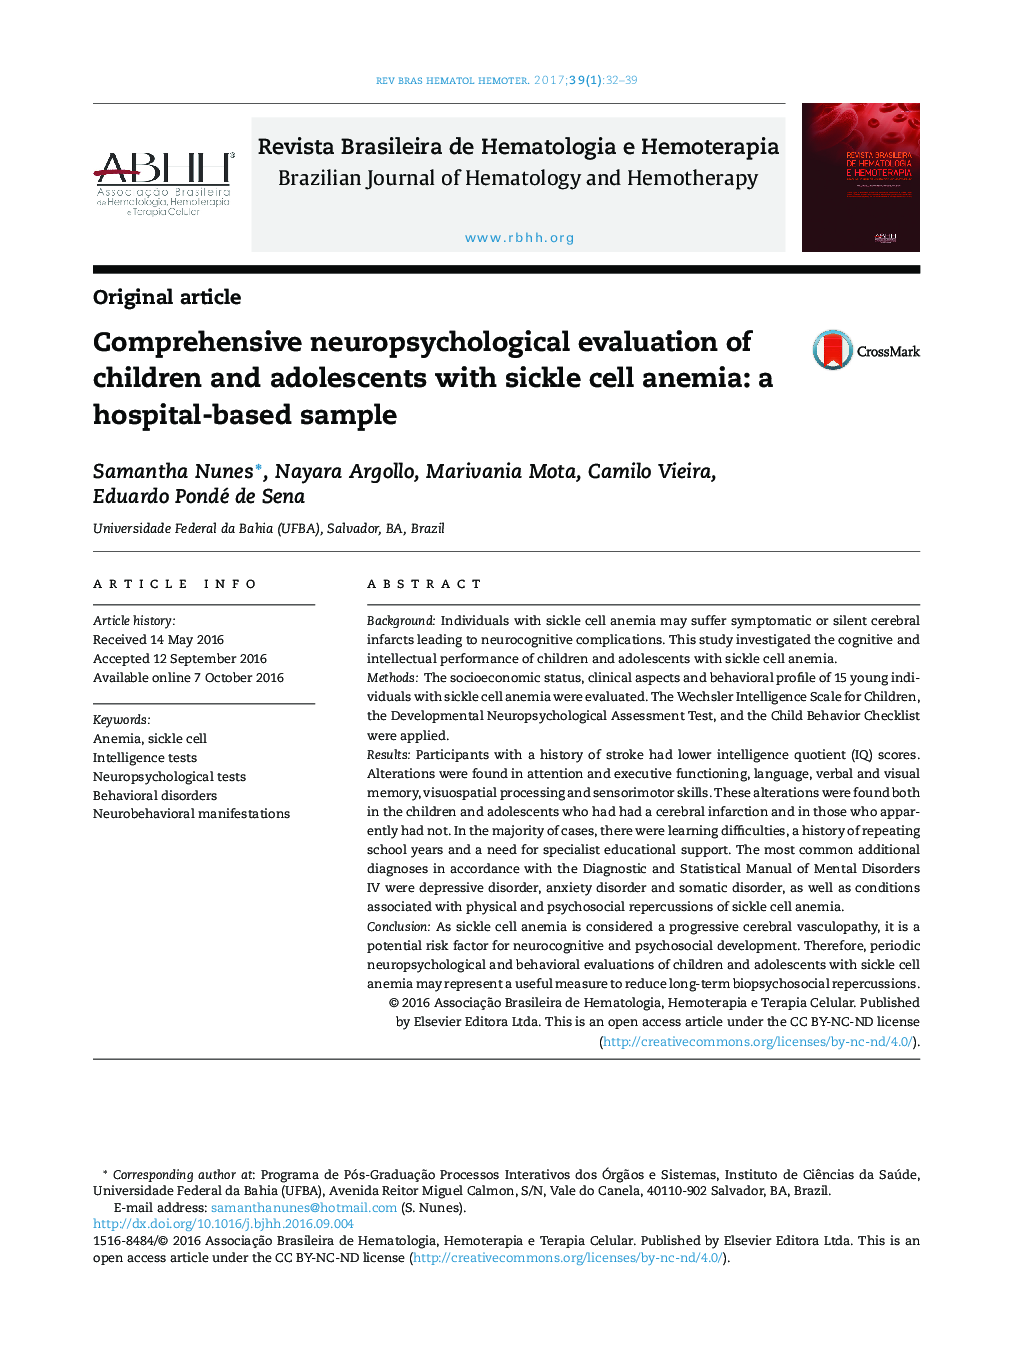 Comprehensive neuropsychological evaluation of children and adolescents with sickle cell anemia: a hospital-based sample